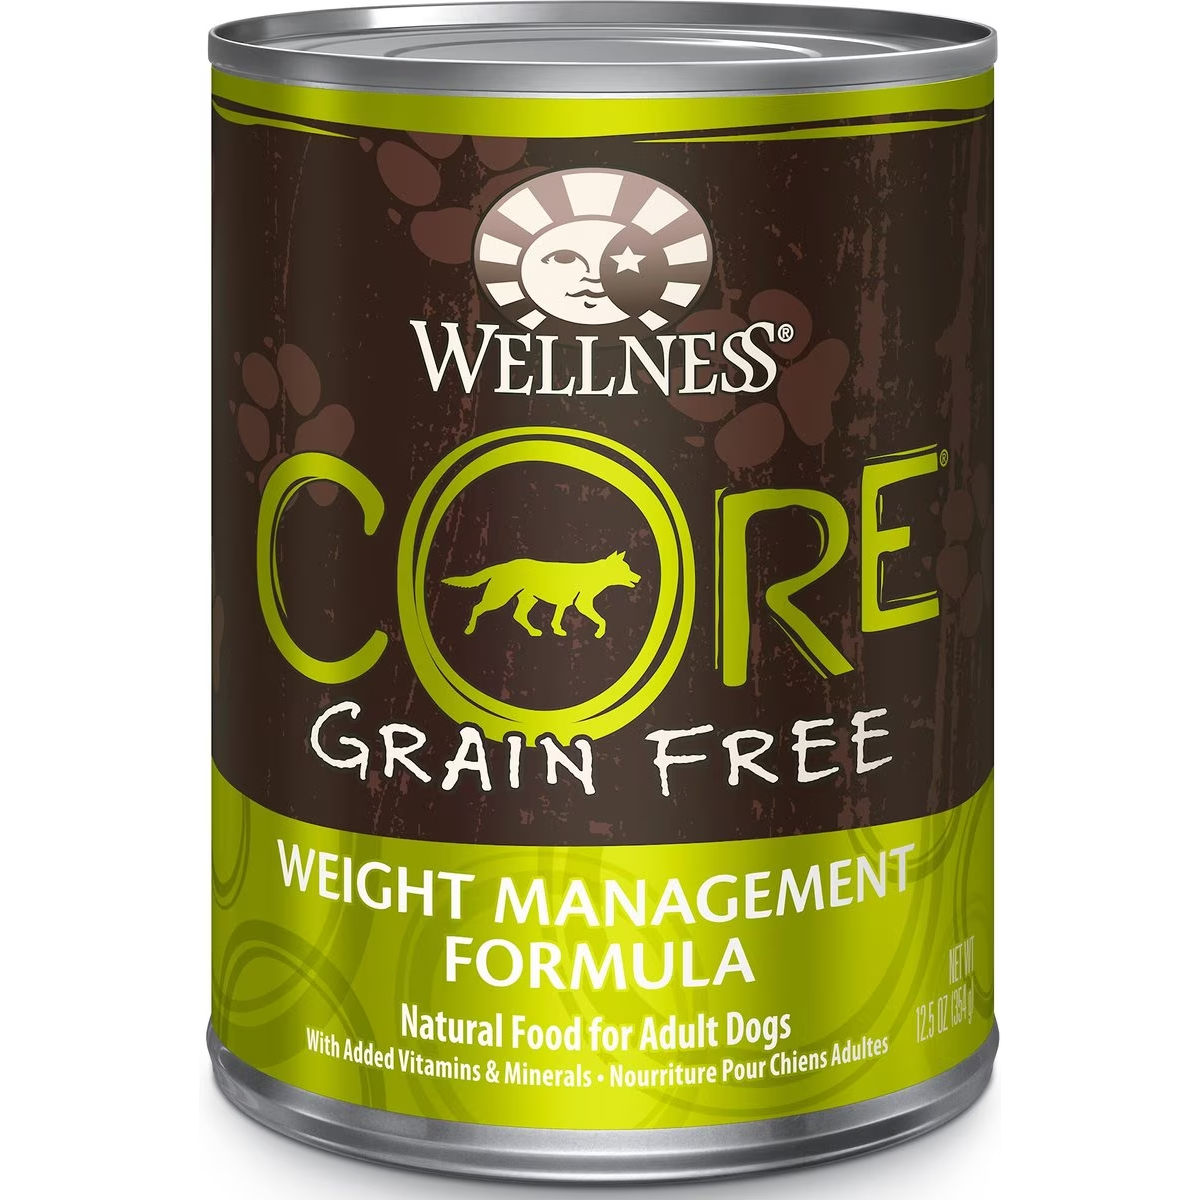 Wellness CORE Grain-Free Weight Management Formula Canned Dog Food